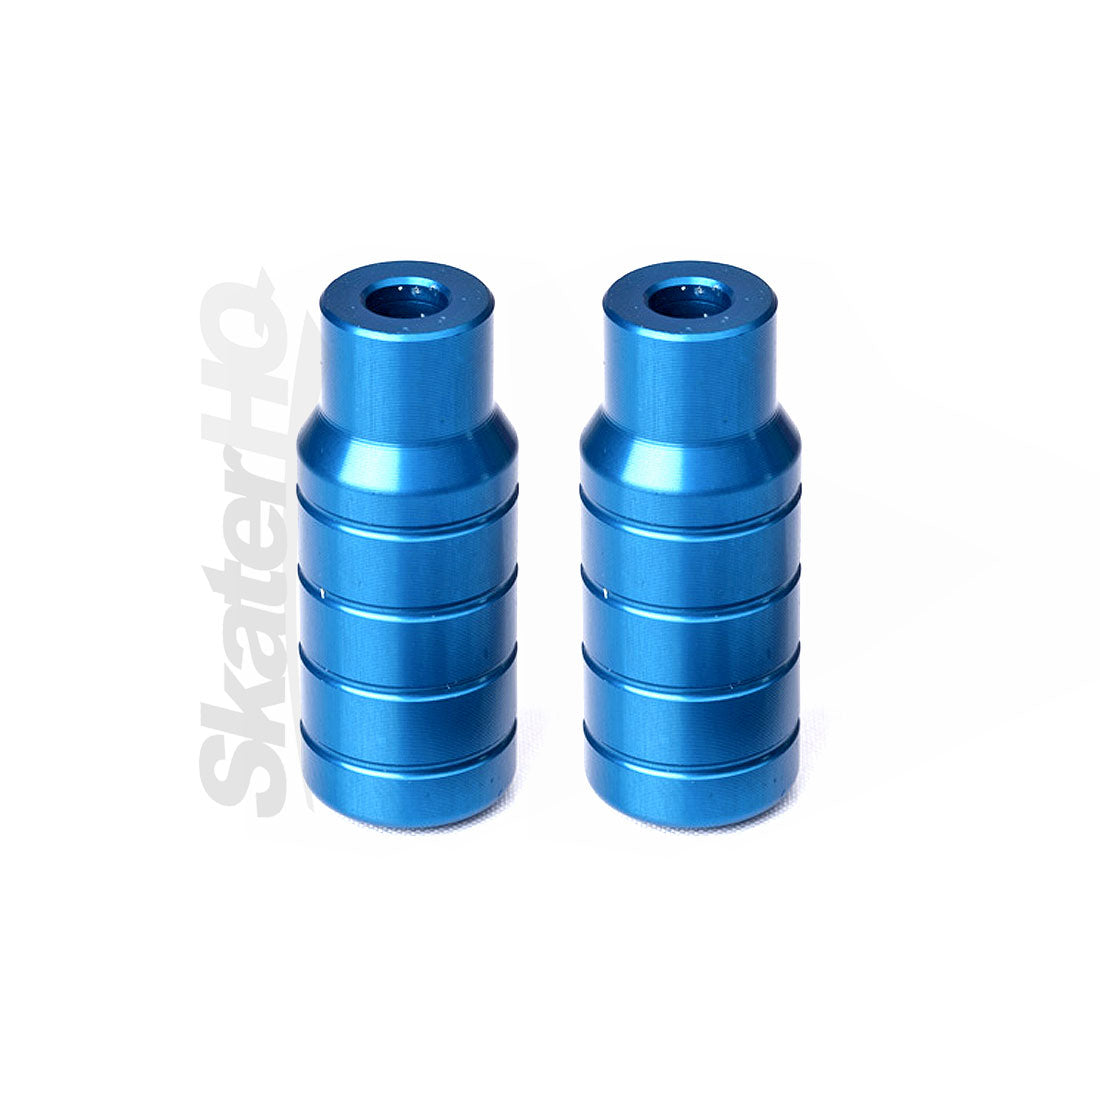 Apex Pro Grind Pegs Blue - Pack of 2 Scooter Hardware and Parts